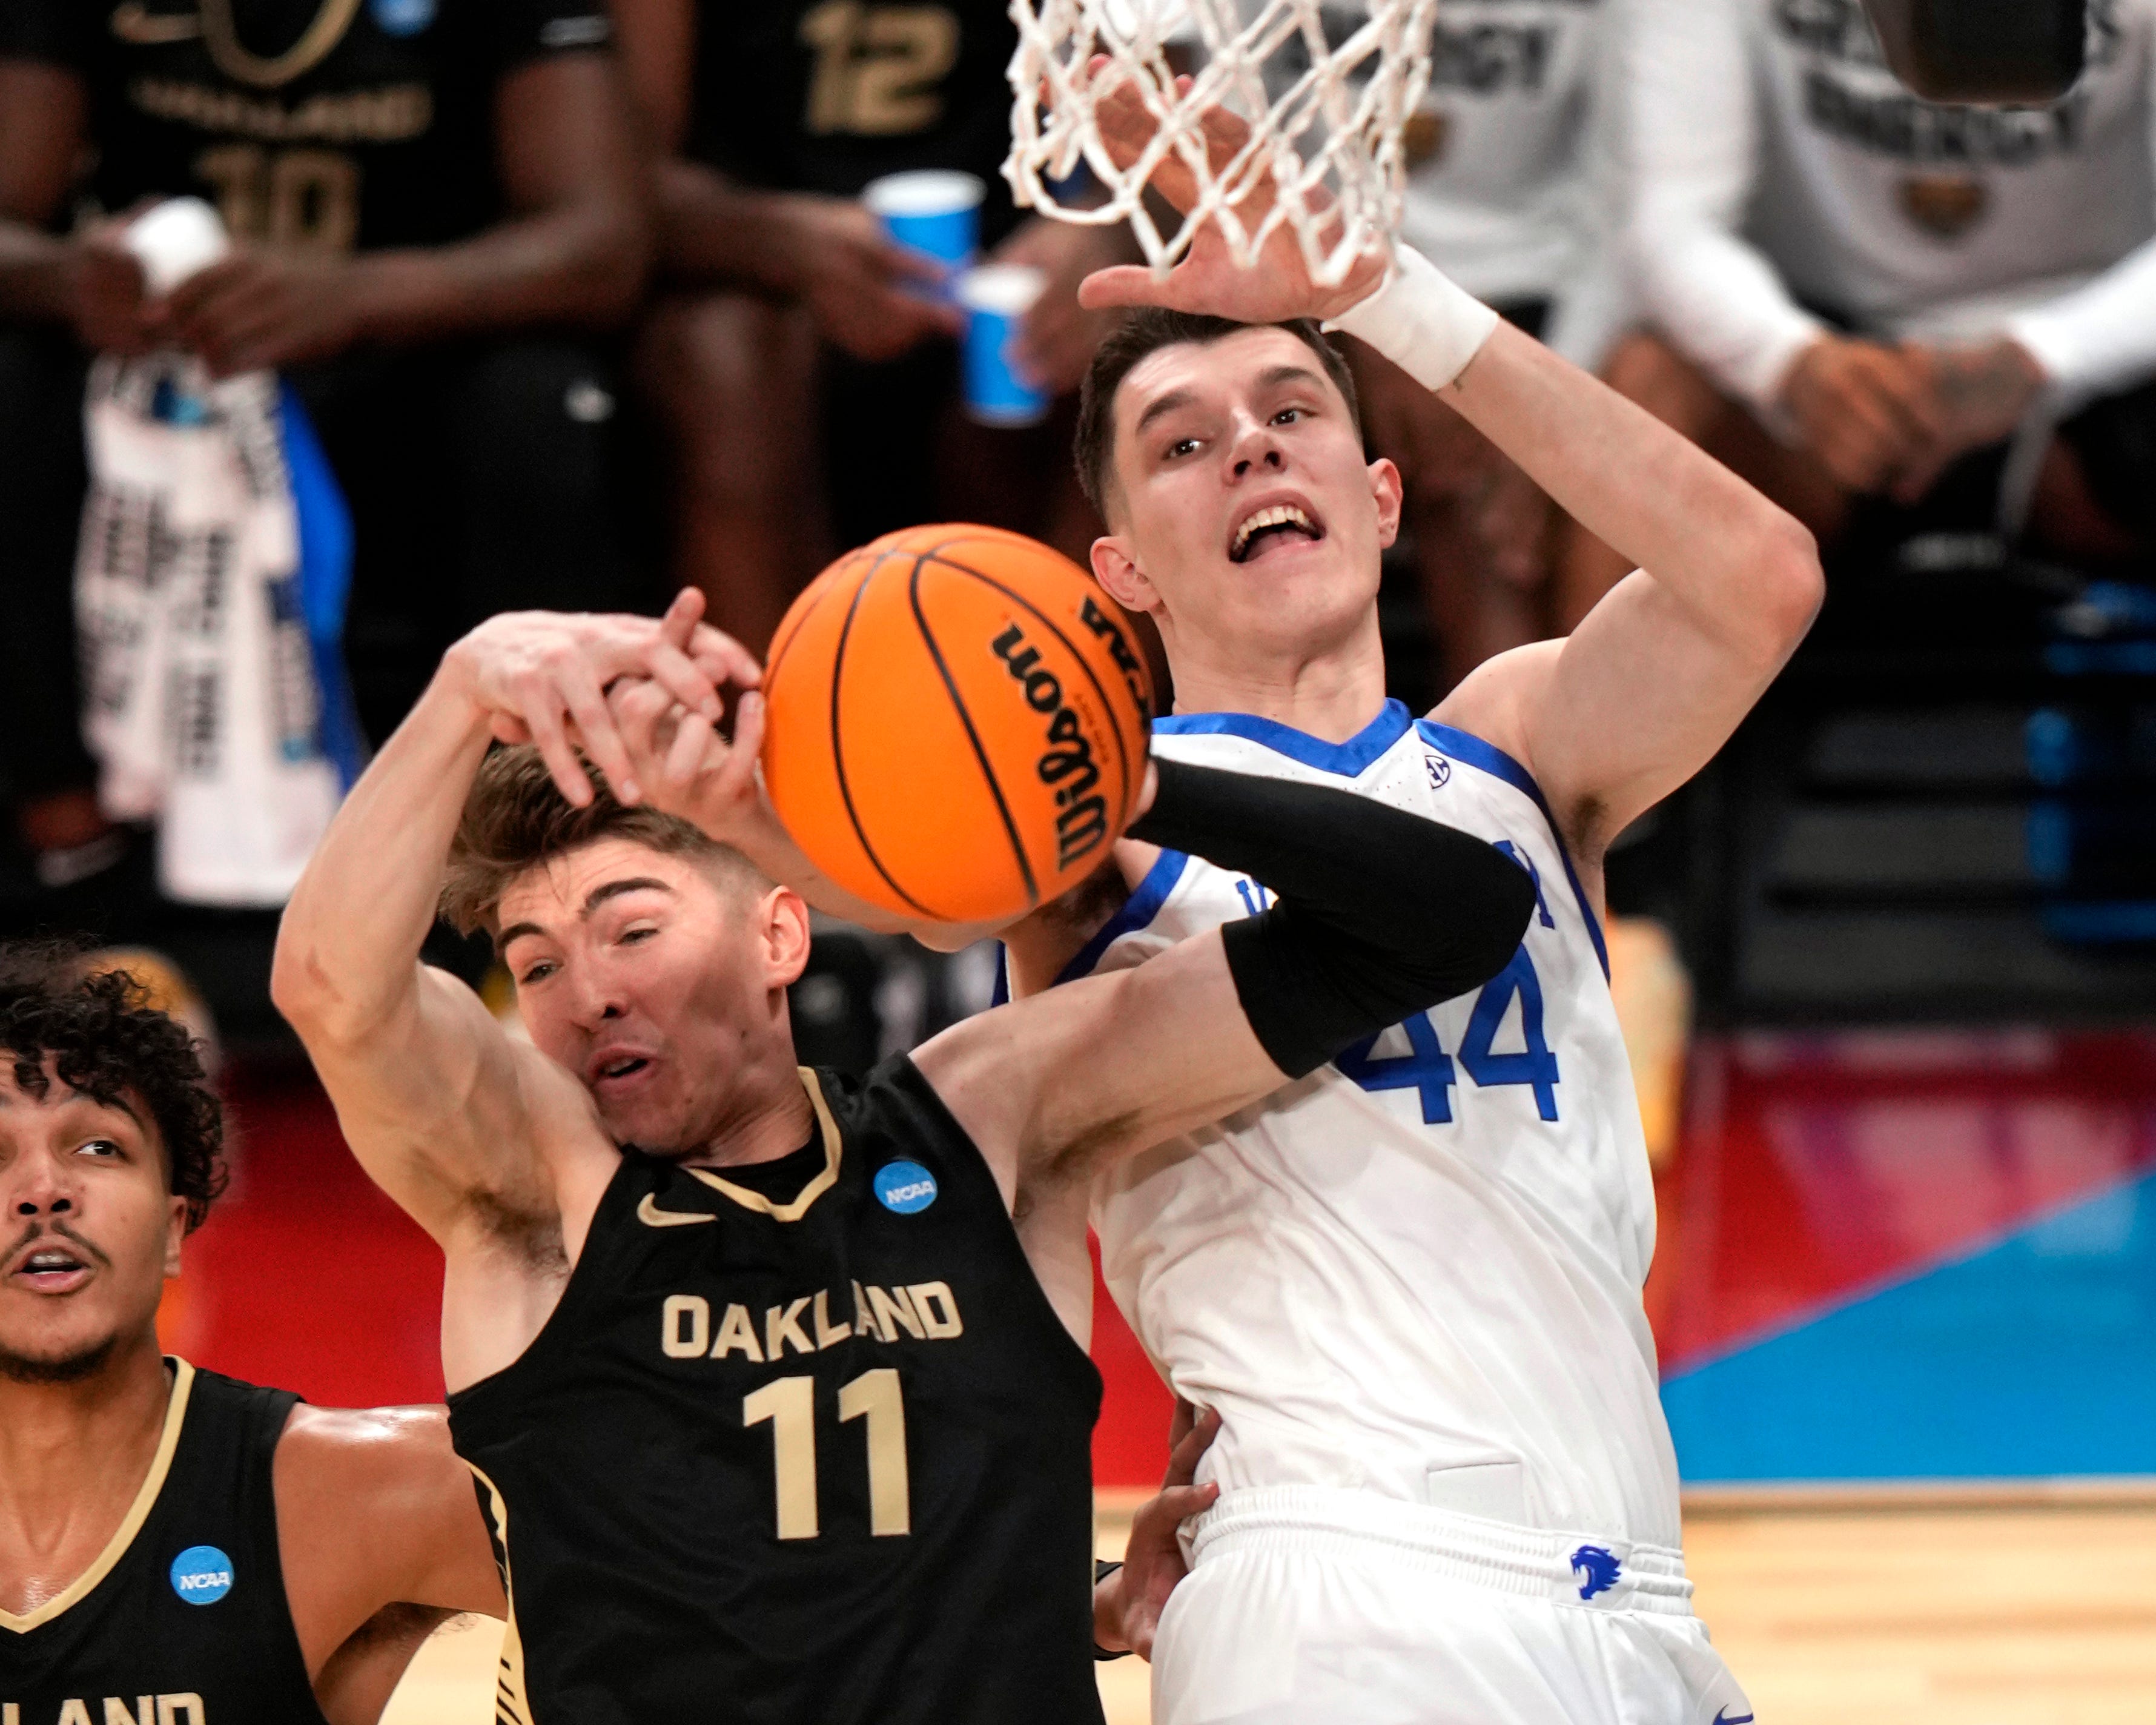 Kentucky 's Zvonimir Ivisic (44) battles for the ball with Oakland's Blake Lampman during the first half of a college basketball game in the first round of the men's NCAA Tournament in Pittsburgh, Thursday, March 21, 2024.